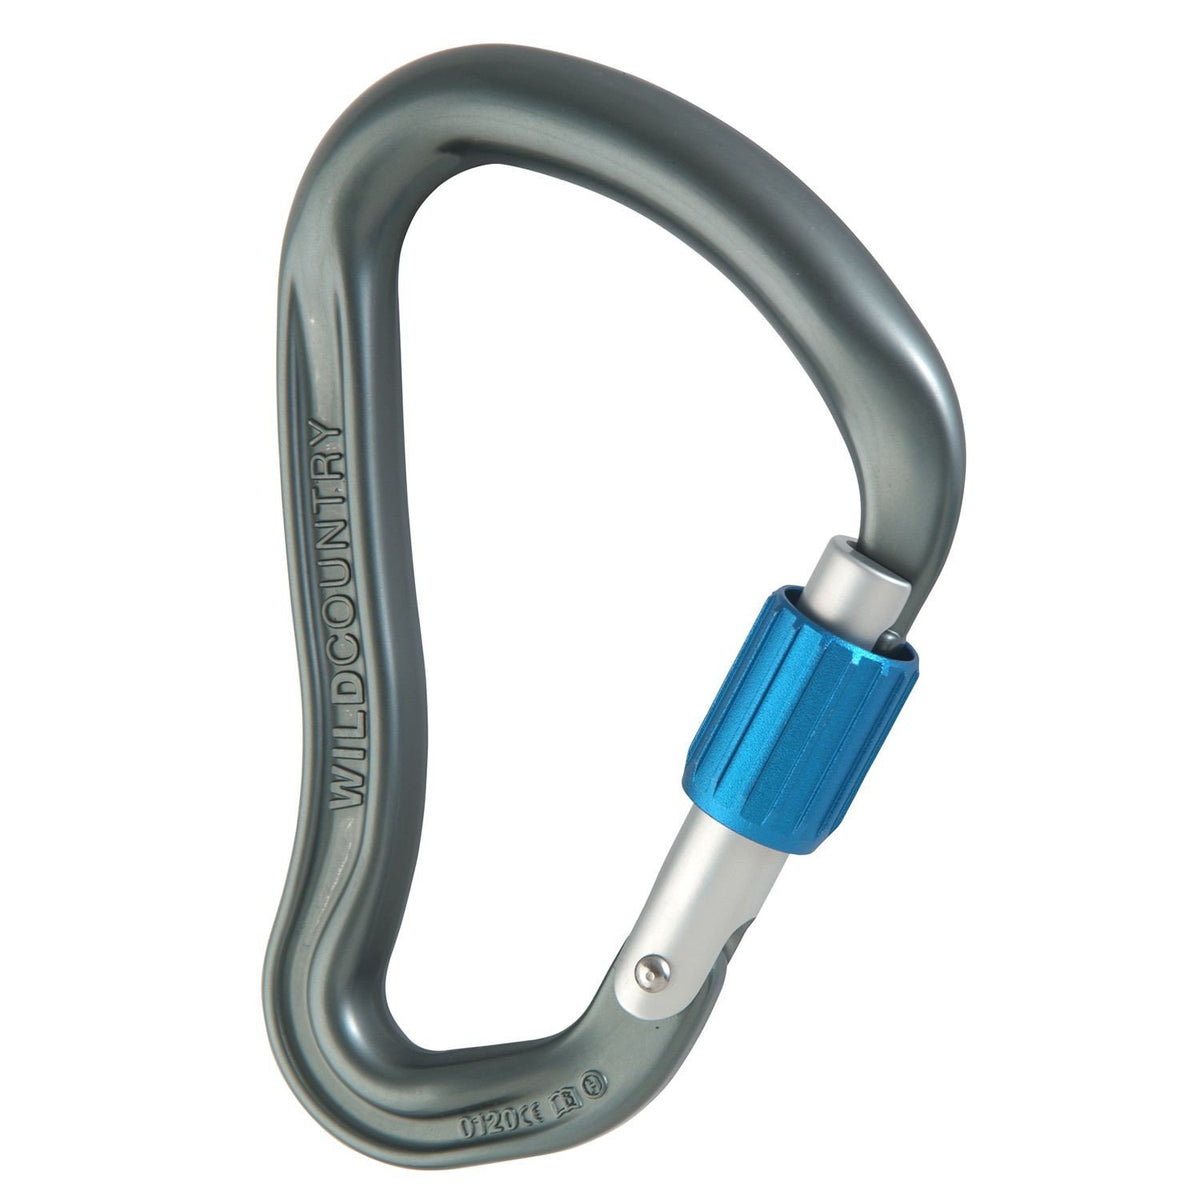 Wild Country Ascent HMS Carabiner, in gun metal grey with a blue screwlock